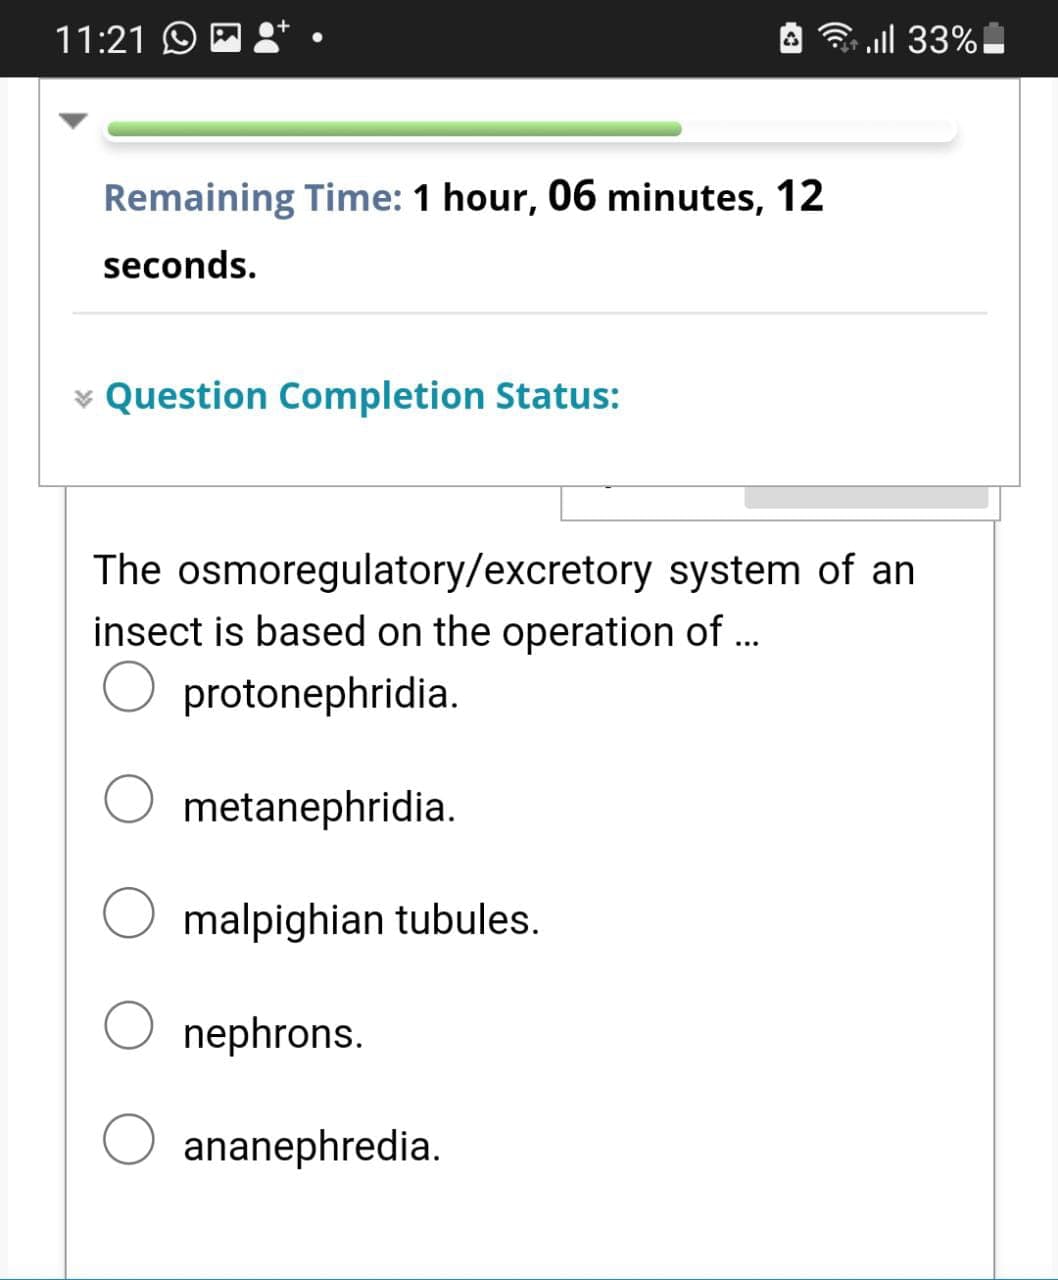 11:21 O E
3 ll 33%
Remaining Time: 1 hour, 06 minutes, 12
seconds.
v Question Completion Status:
The osmoregulatory/excretory system of an
insect is based on the operation of ...
O protonephridia.
metanephridia.
malpighian tubules.
nephrons.
ananephredia.
